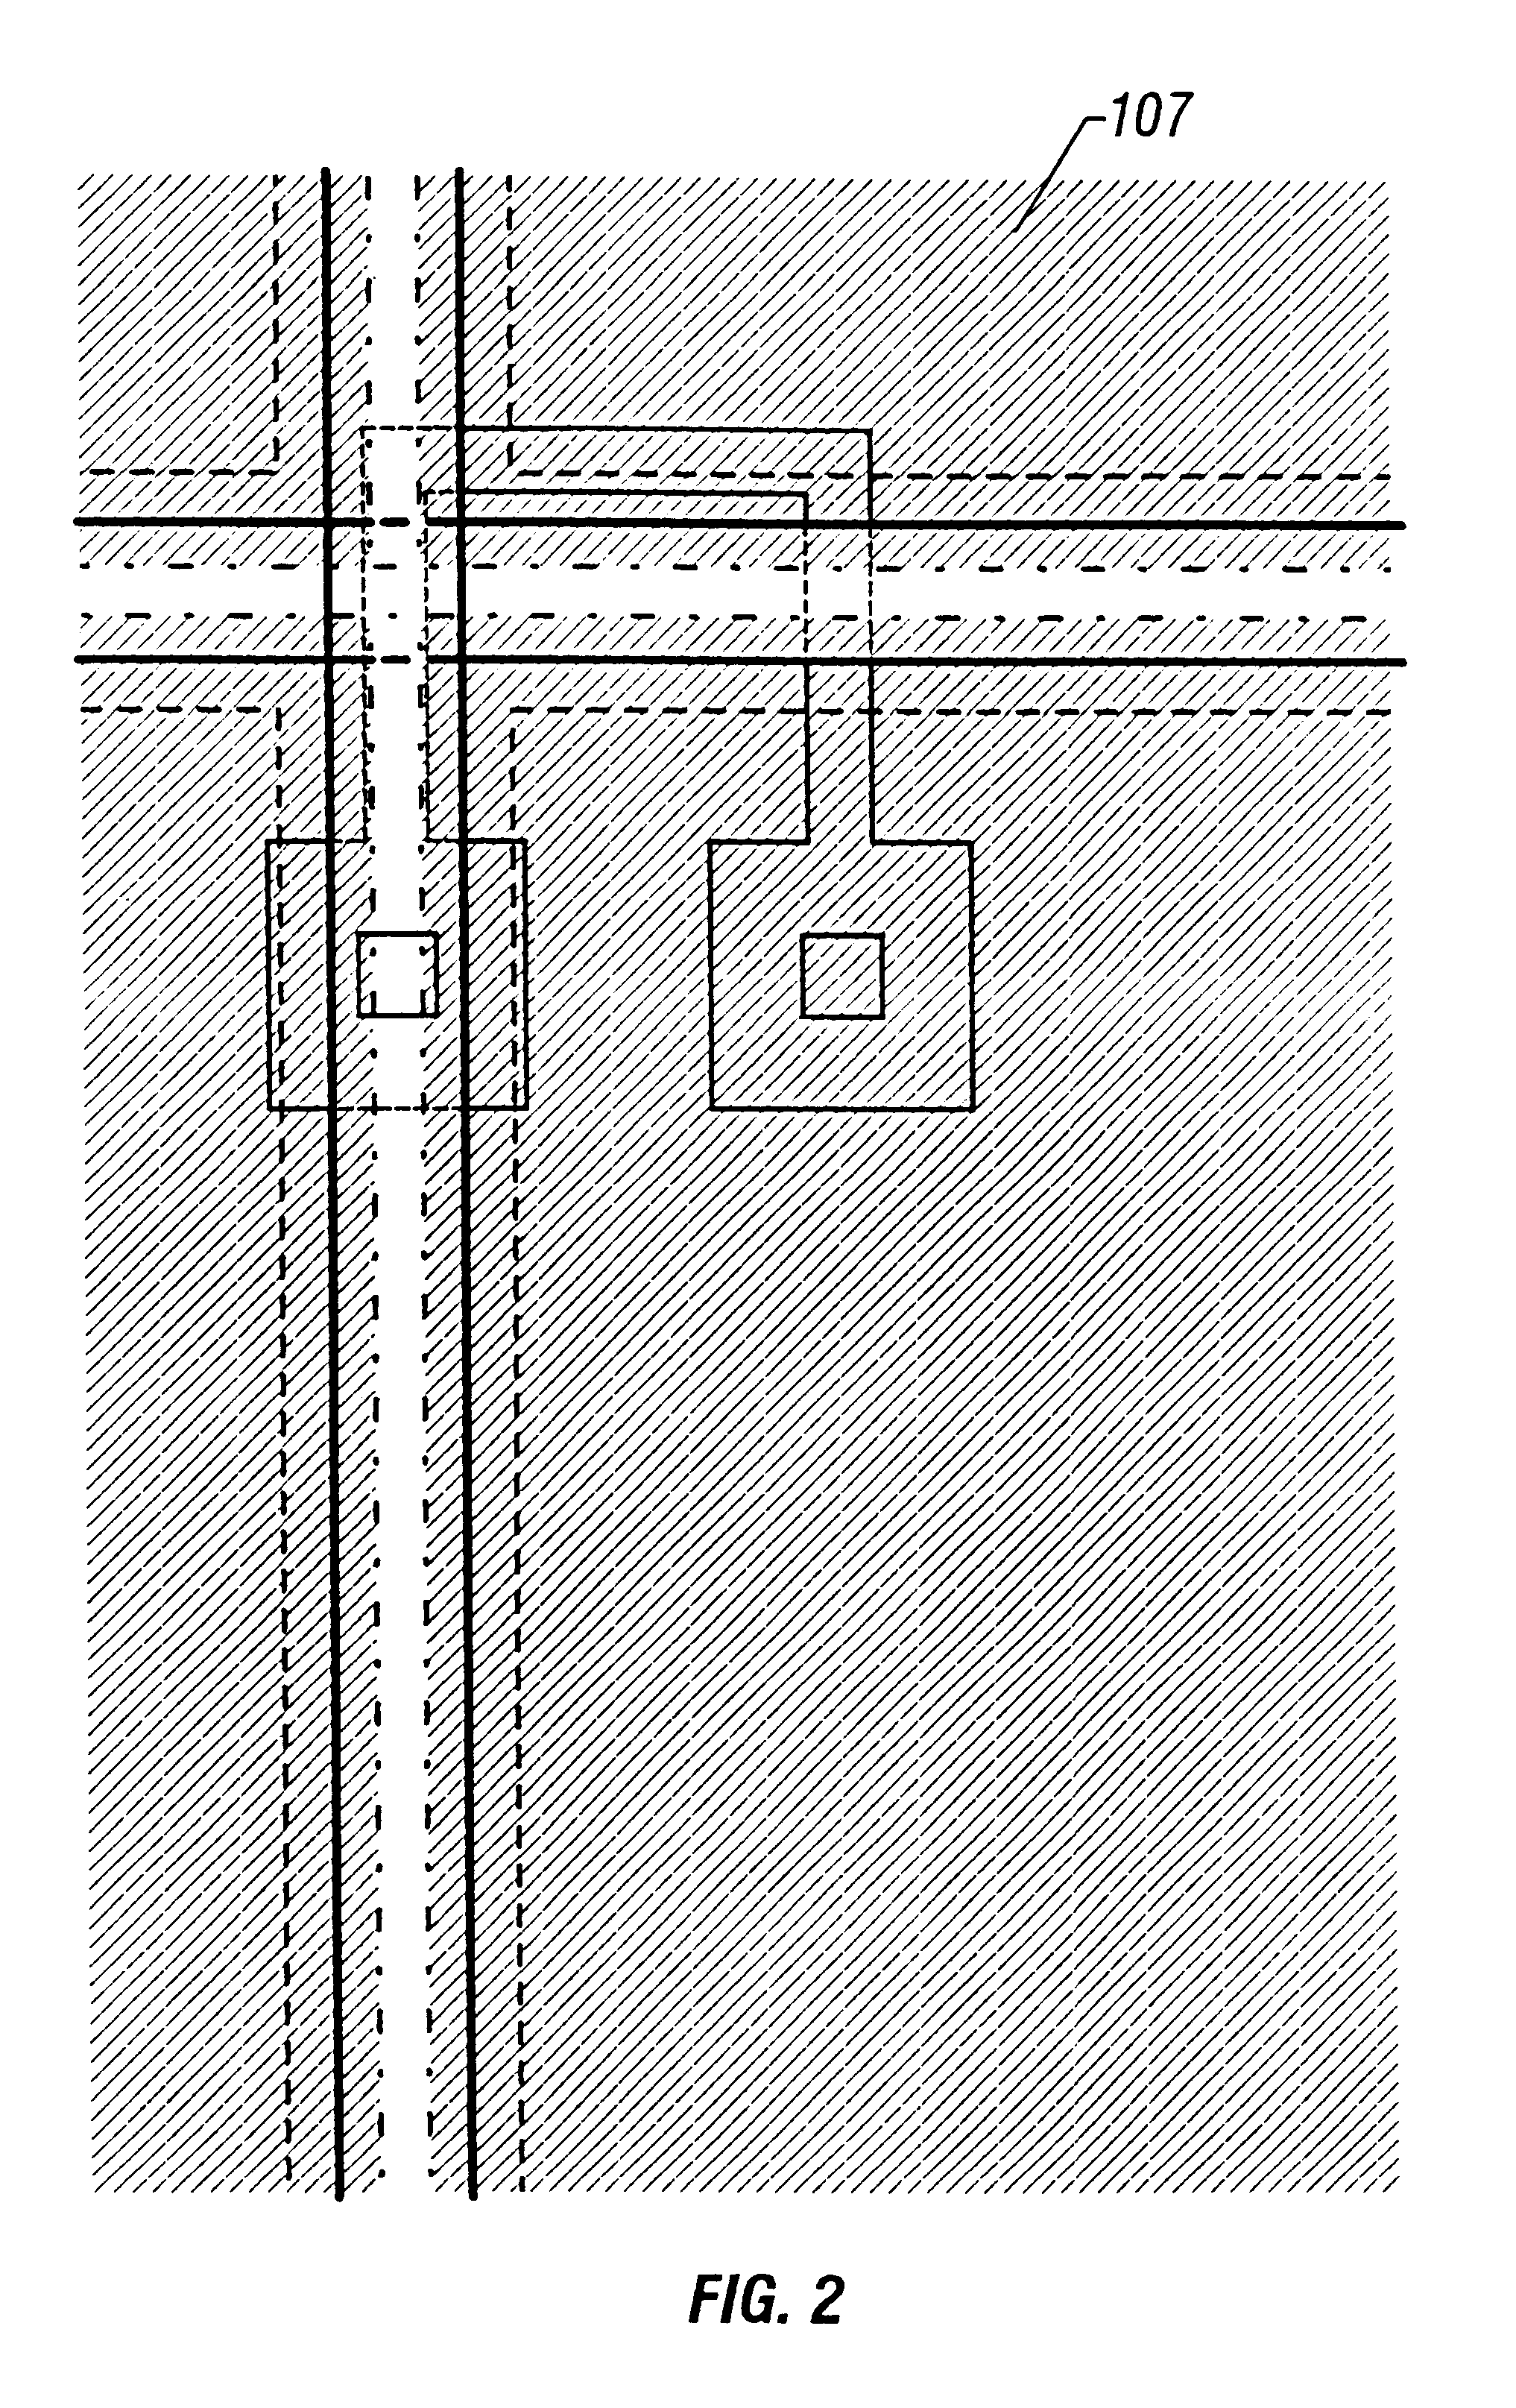 Display device including a transparent electrode pattern covering and extending along gate & source lines